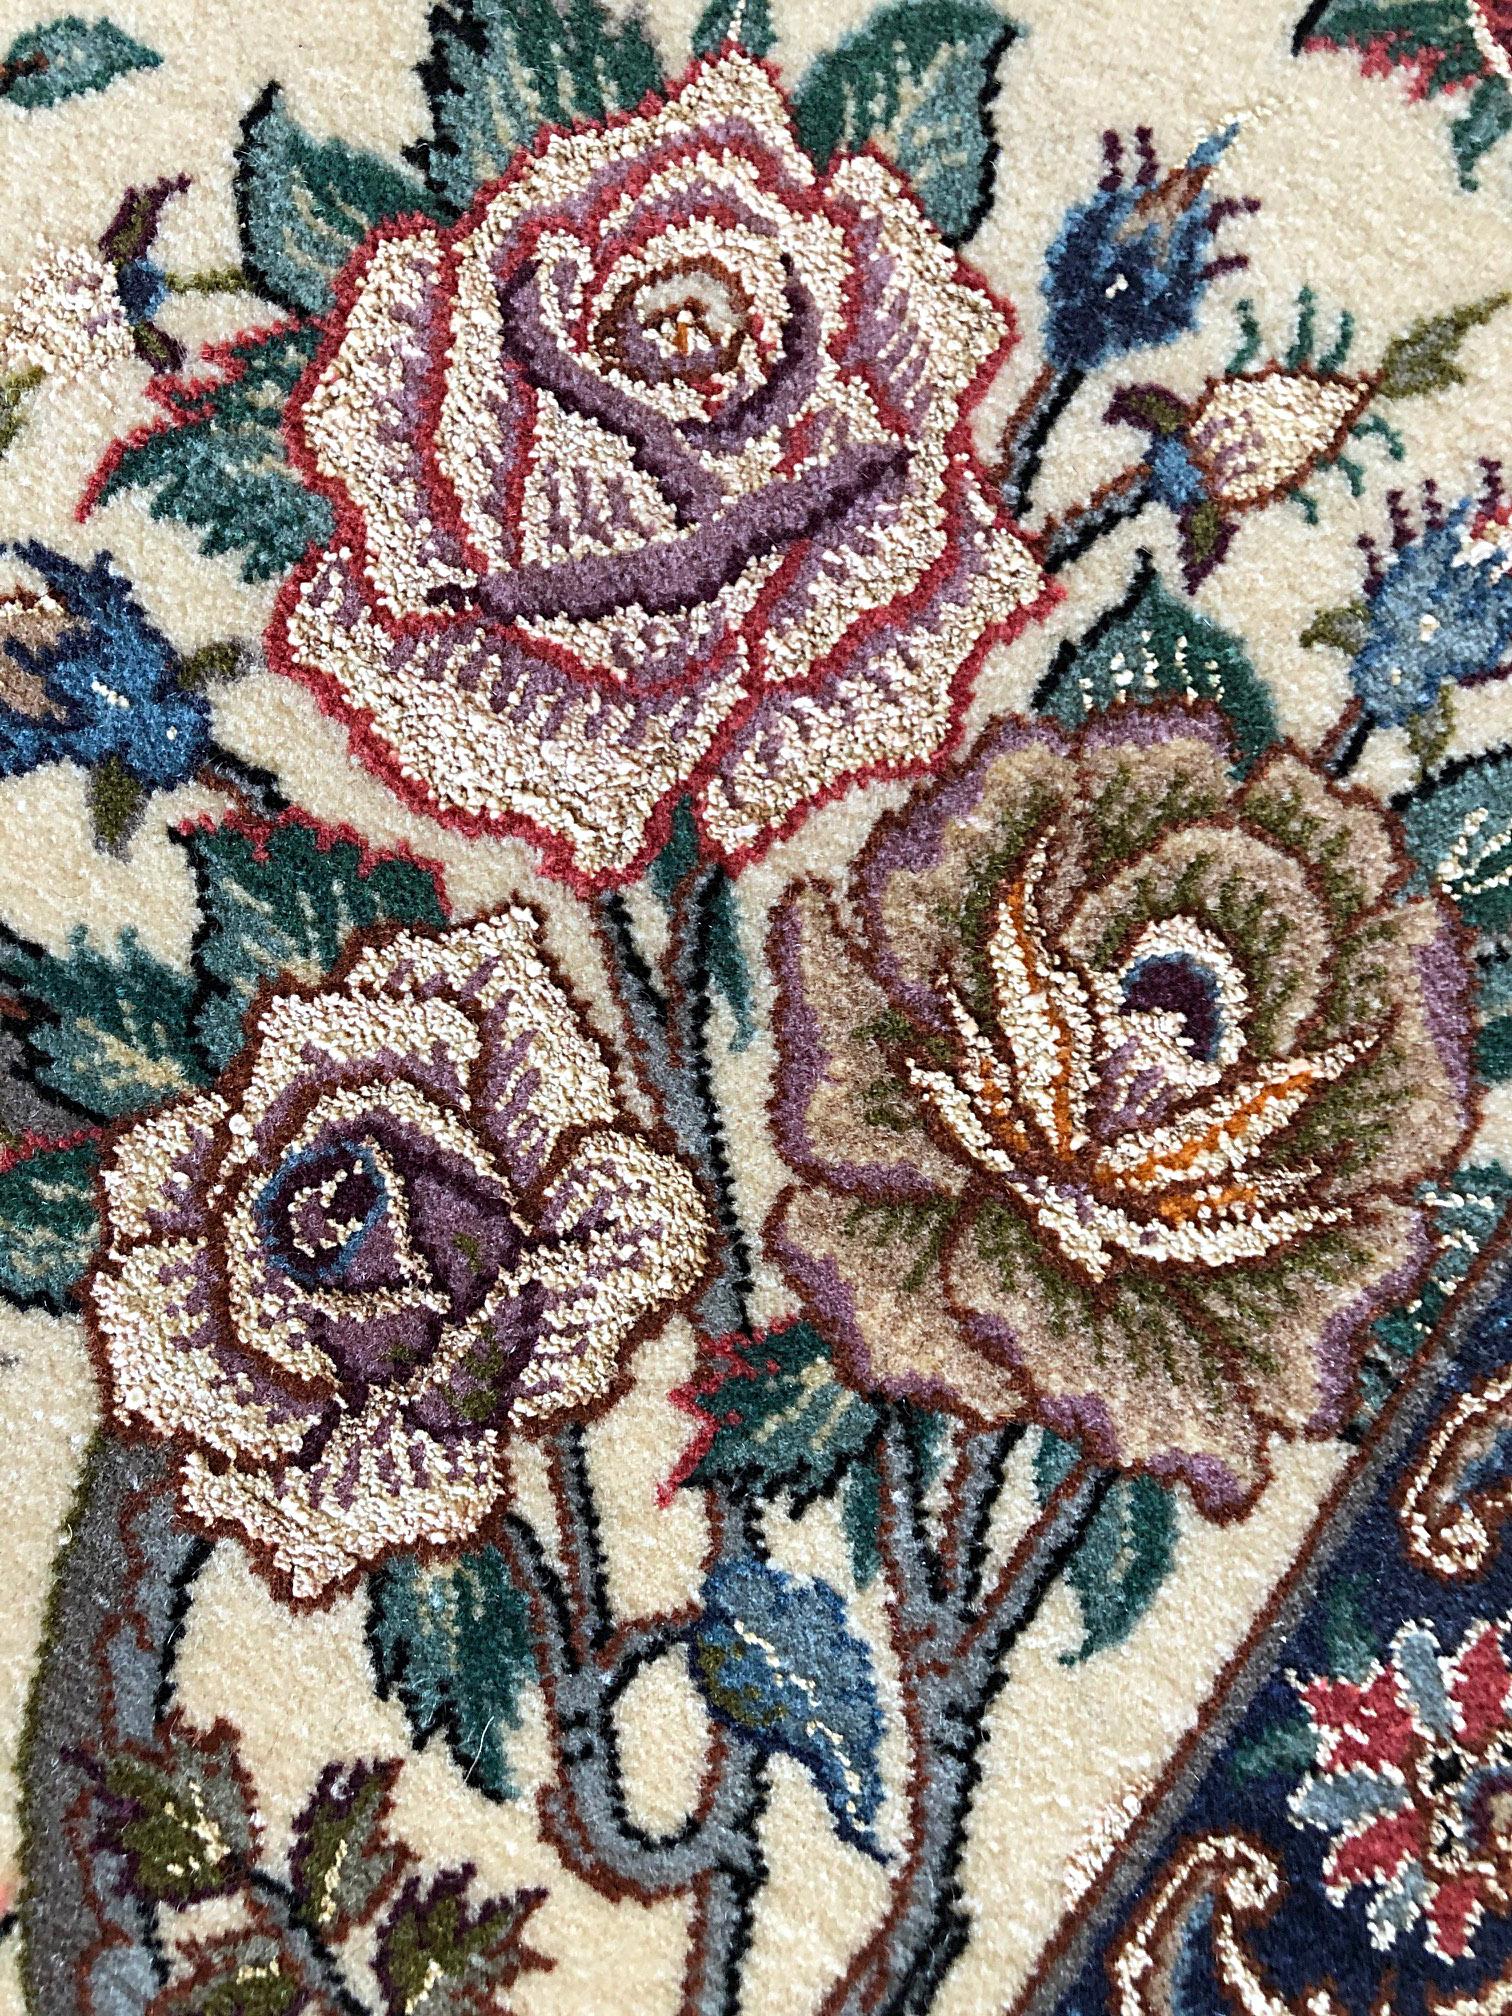 floral area rugs